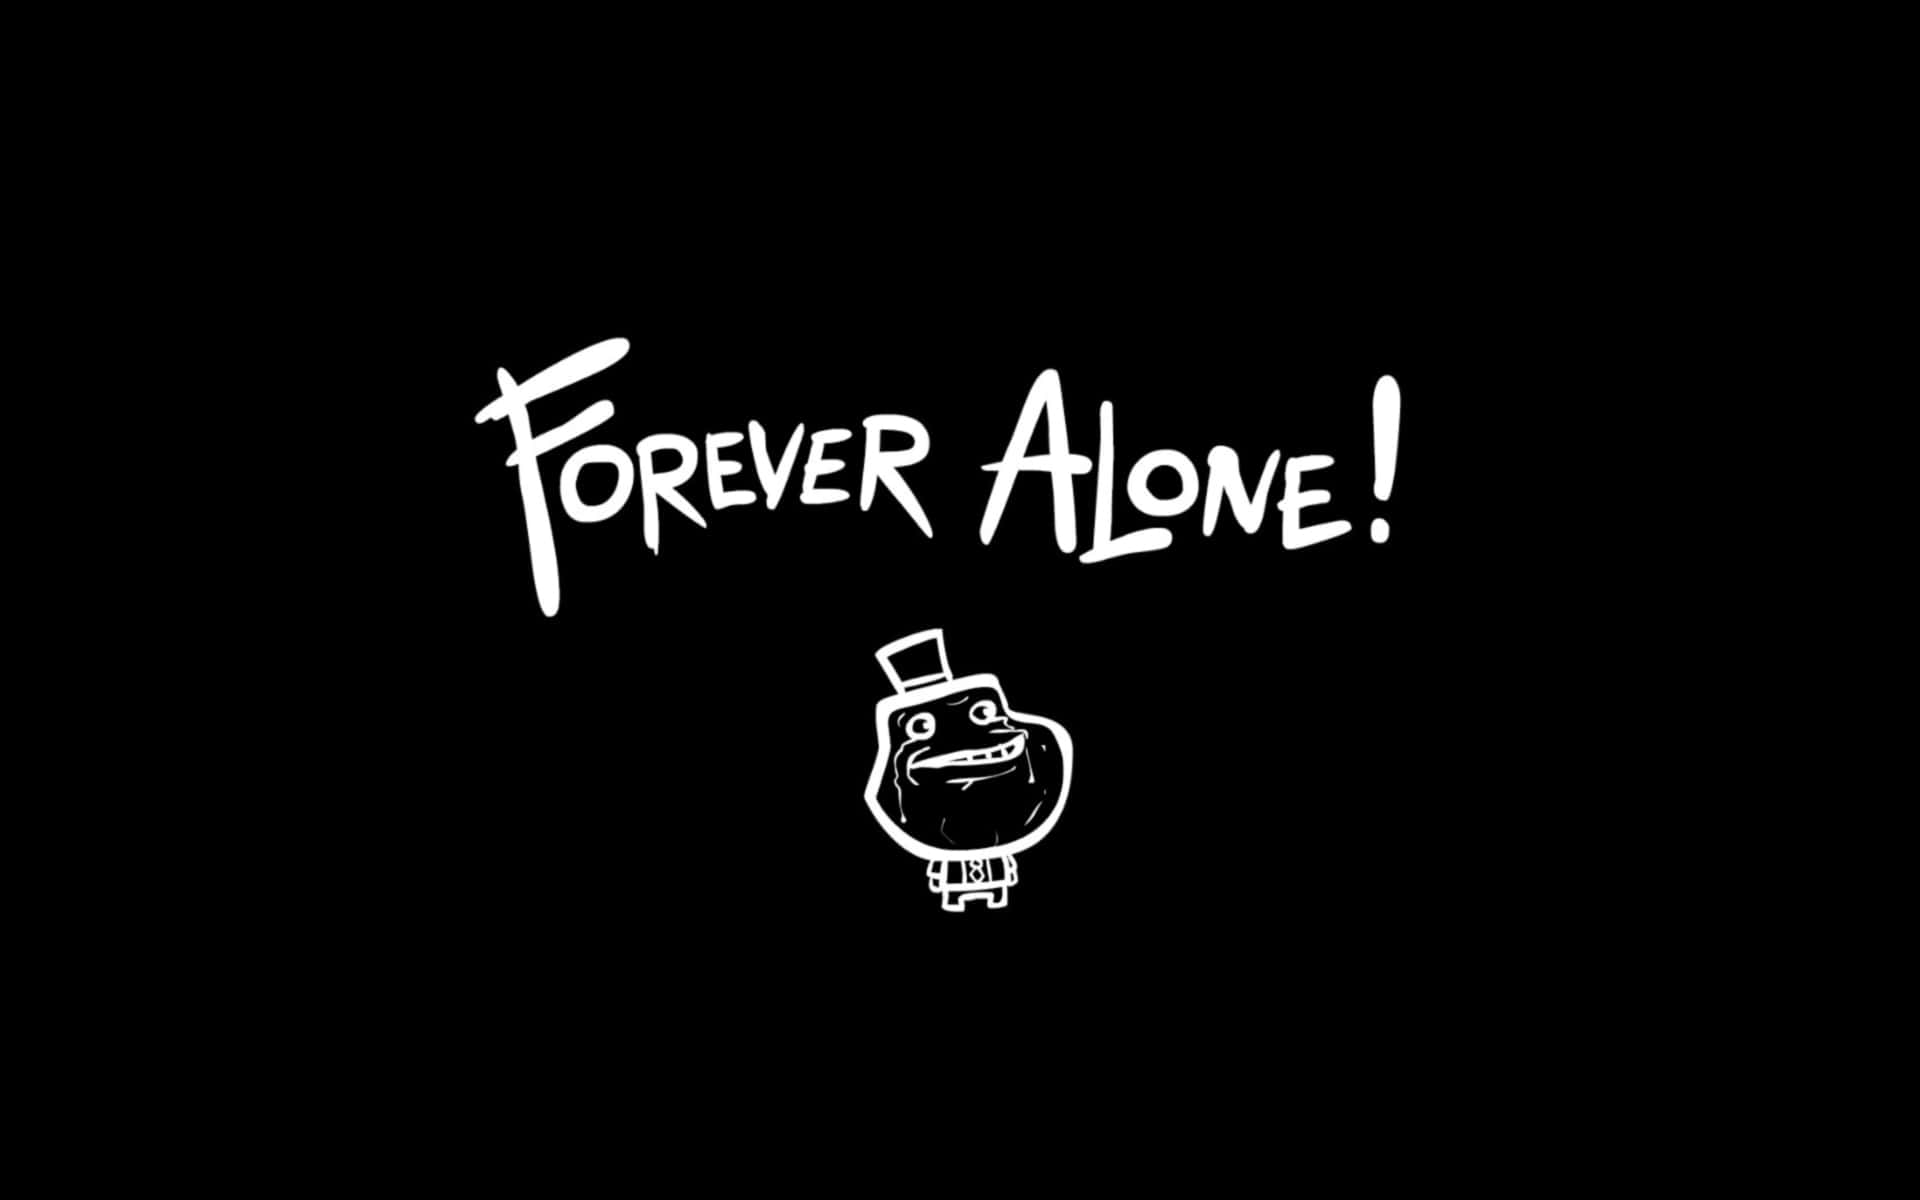 Forever Alone - A Black Background With A White Hand Holding A Pen